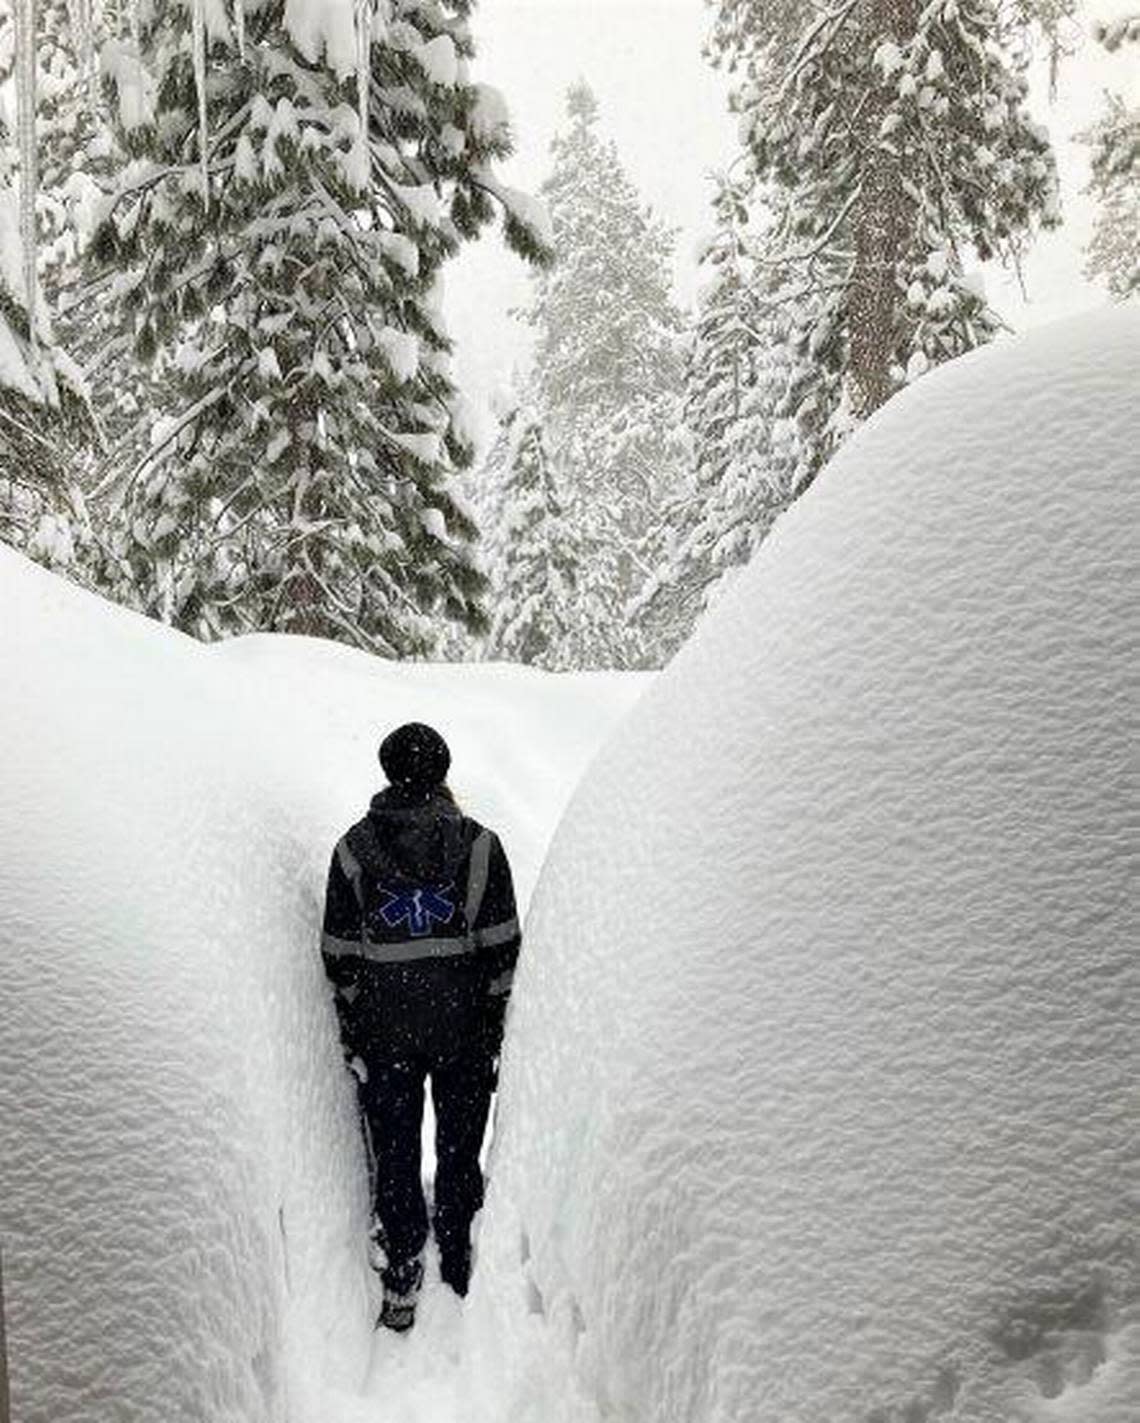 National Park Service employee in Lodgepole is seen exiting their home with a narrow path between snow berms and snow-covered trees ahead in this photo posted Saturday.